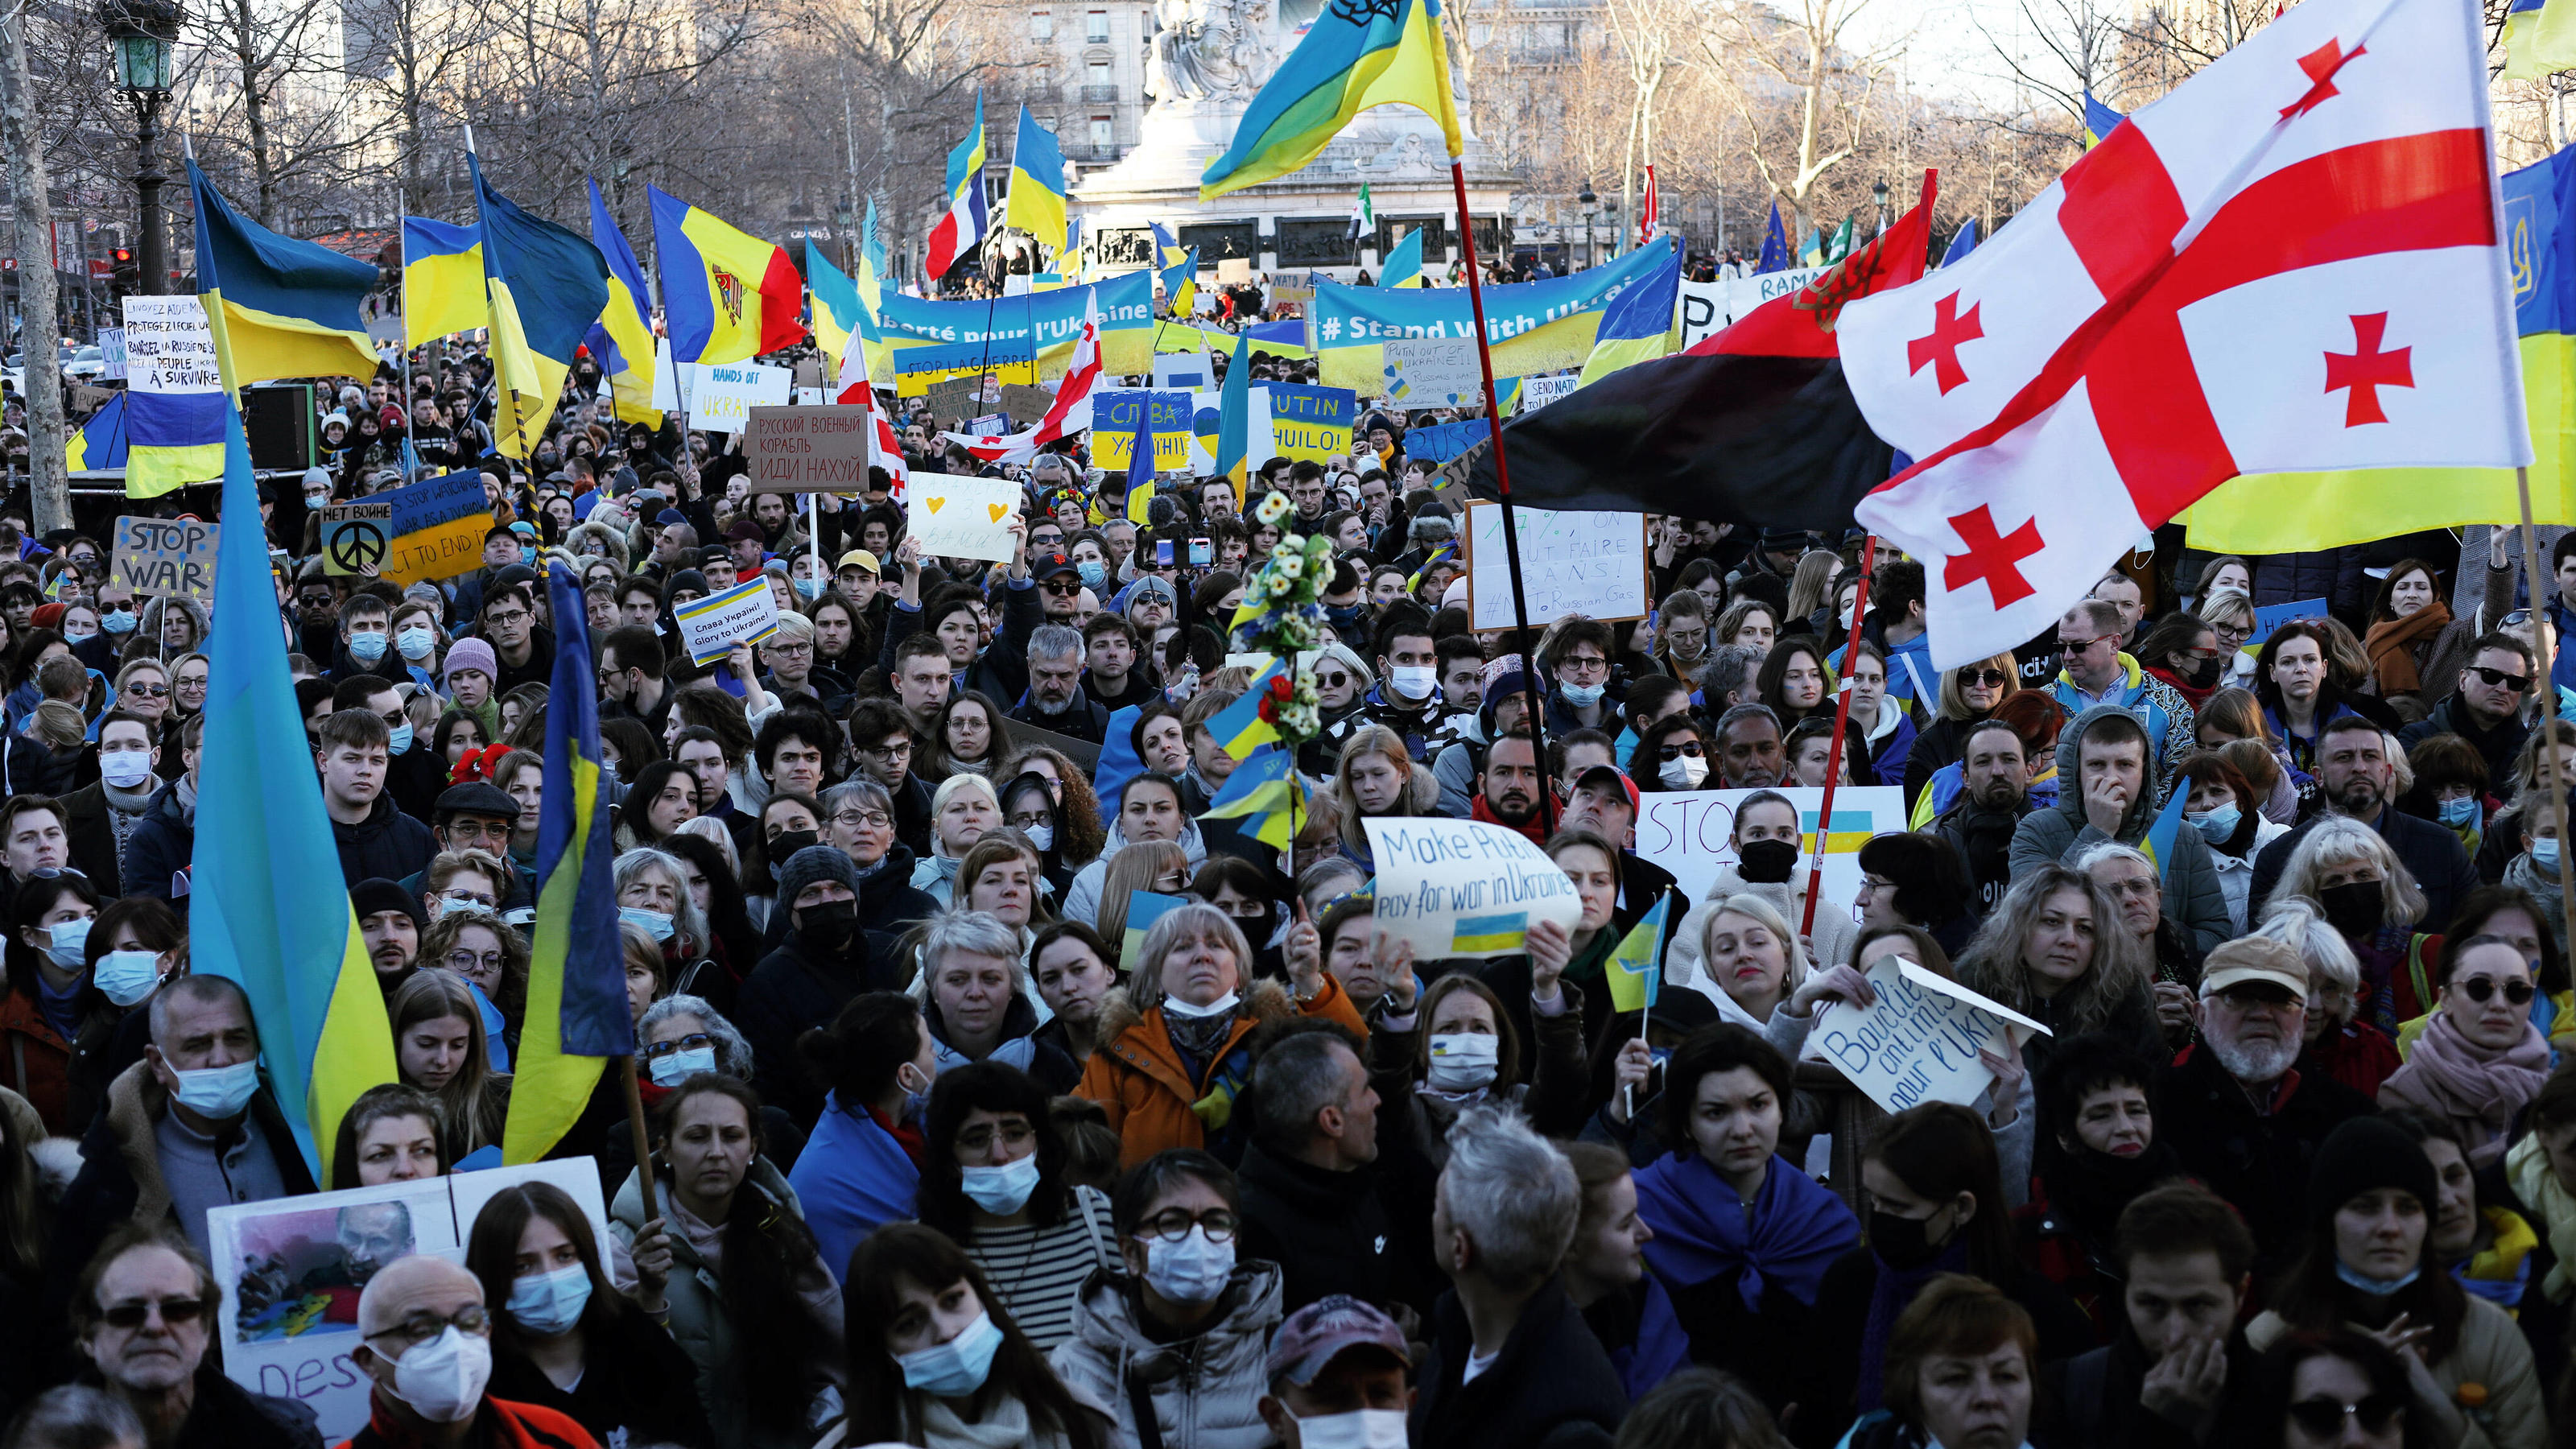 Rally Against War In Ukraine In Paris, France People protesting to support the Ukraine in front of the Republic Palace, in Paris, France, on February 26, 2022. Paris France PUBLICATIONxNOTxINxFRA Copyright: xIbrahimxEzzatx originalFilename: ezzat-not